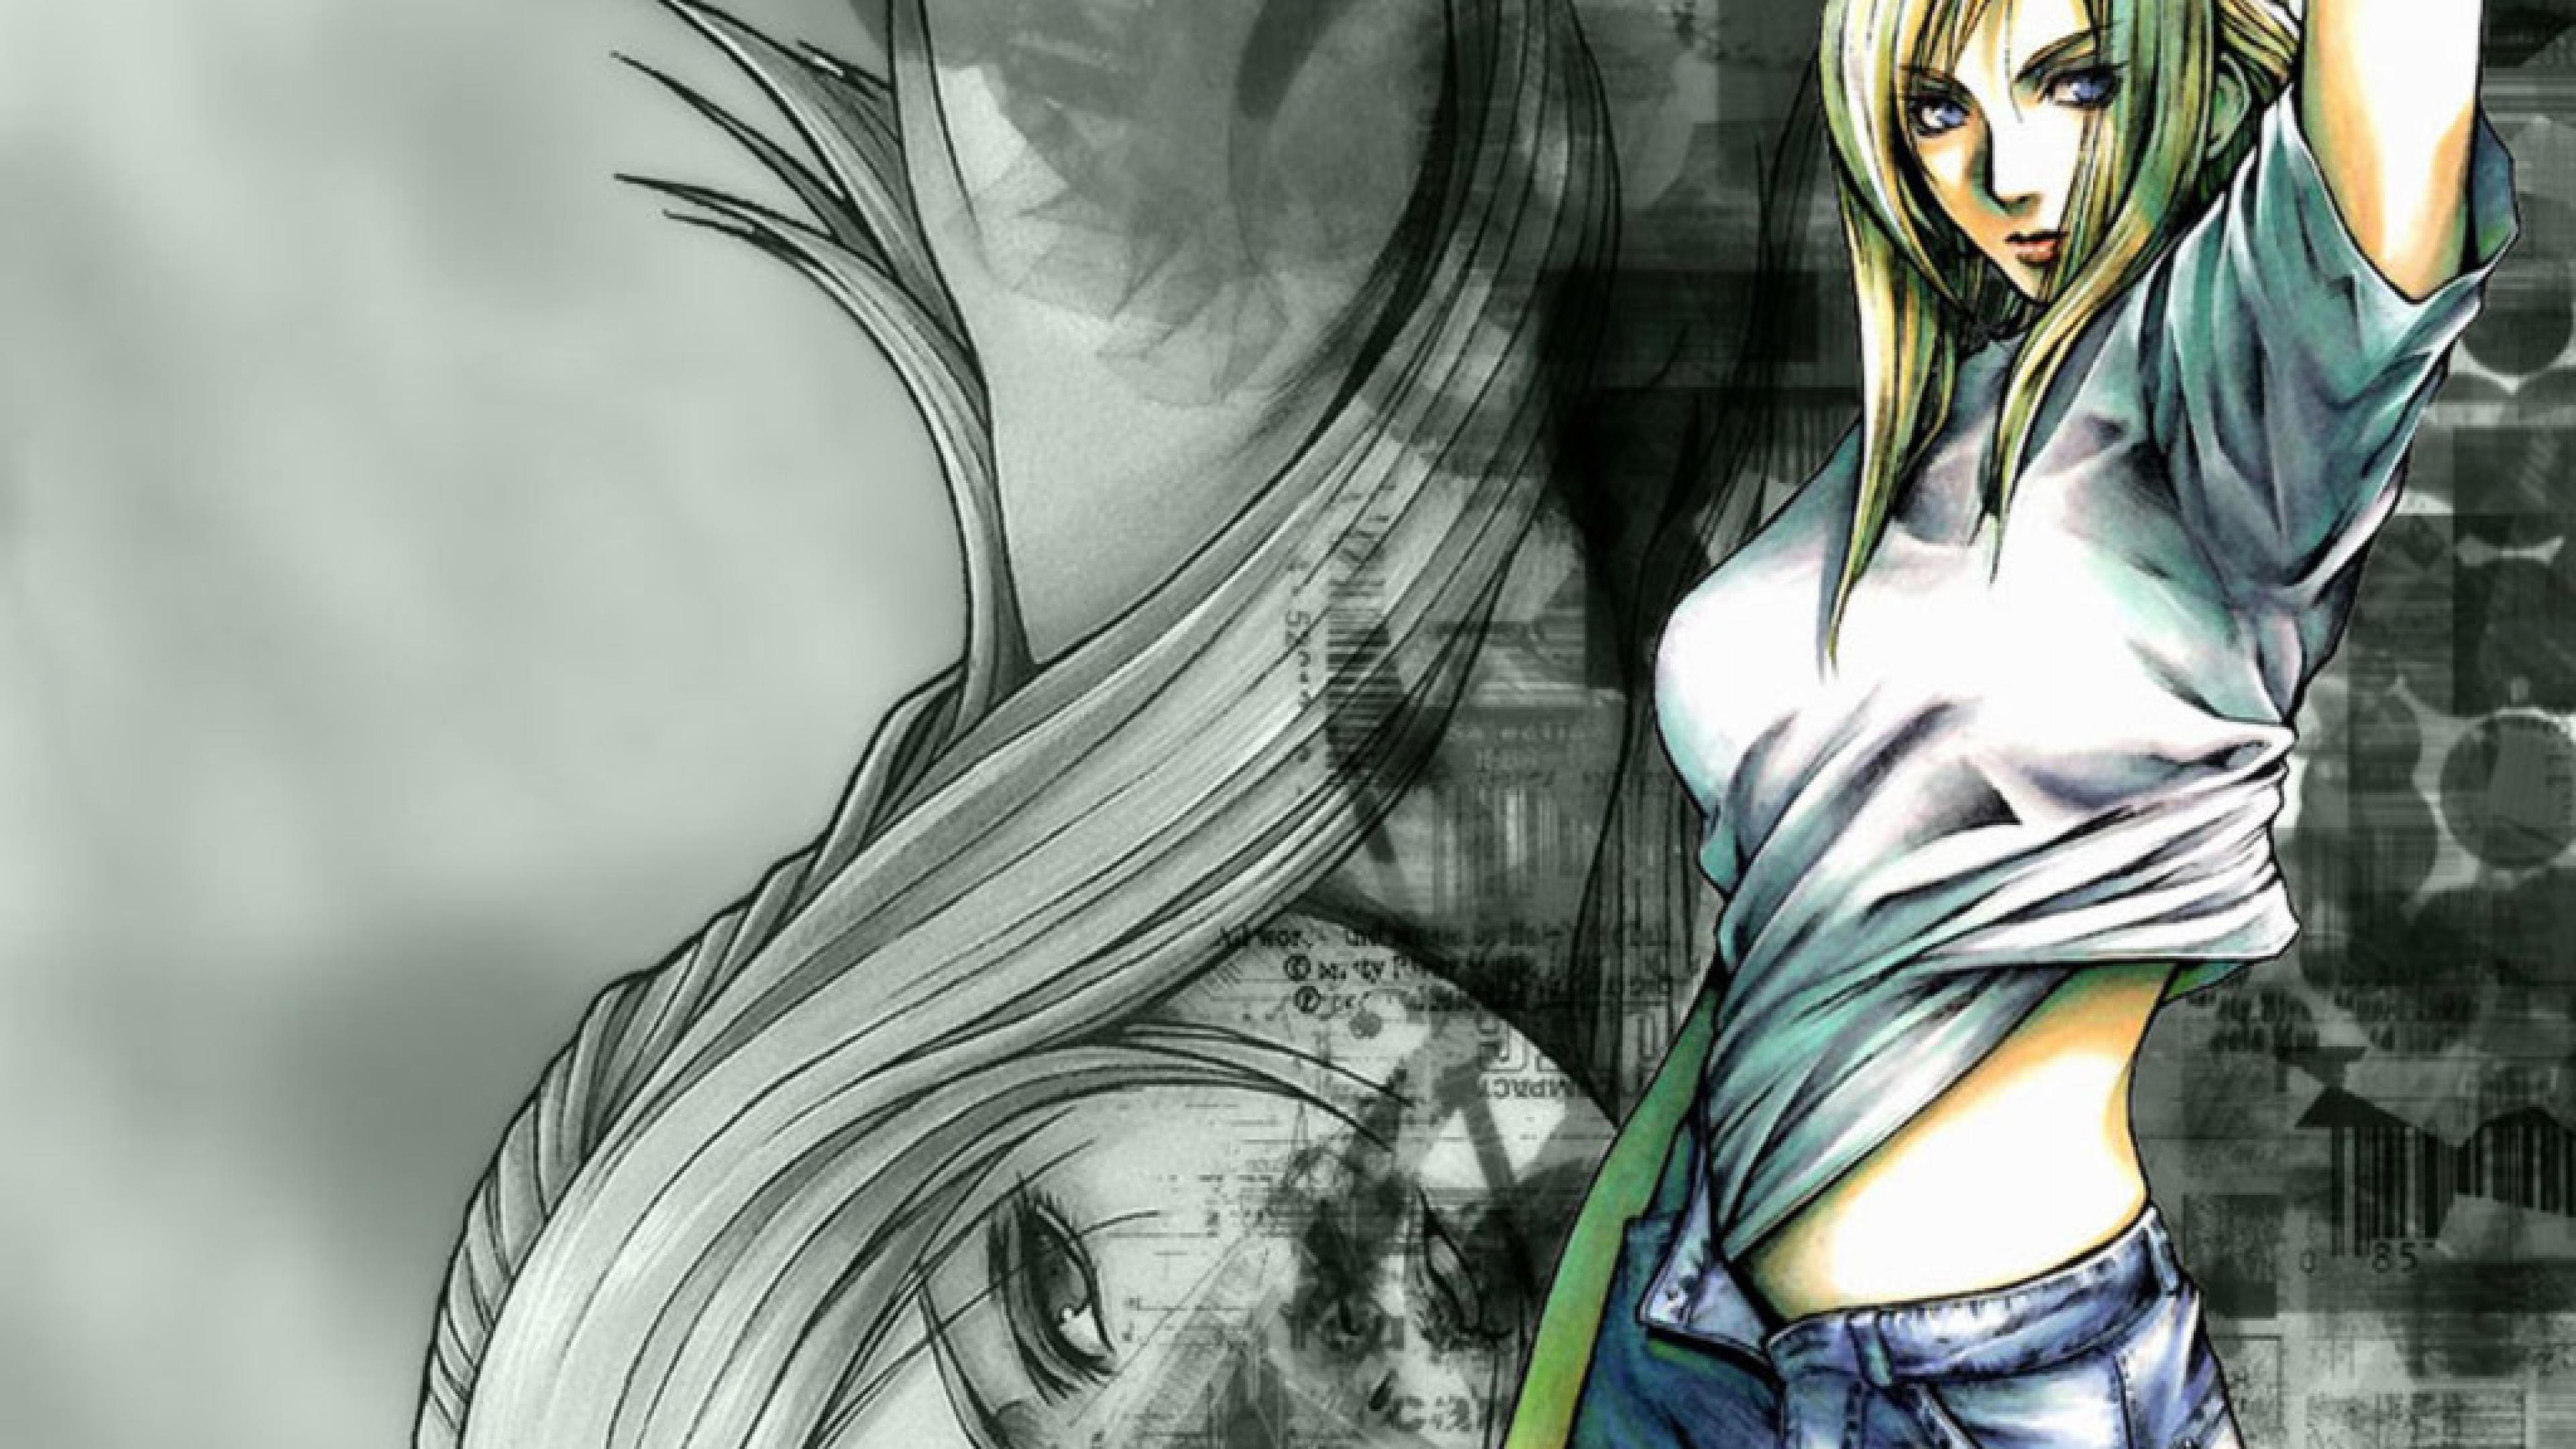 3840x2160 Free download parasite eve best widescreen background awesome a9sq [] for your Desktop, Mobile \u0026 Tablet | Explore 73+ Parasite Eve Wallpaper | Parasite Eve Wallpaper, Parasite Eve 2 Wallpaper, Friday Eve Wallpaper